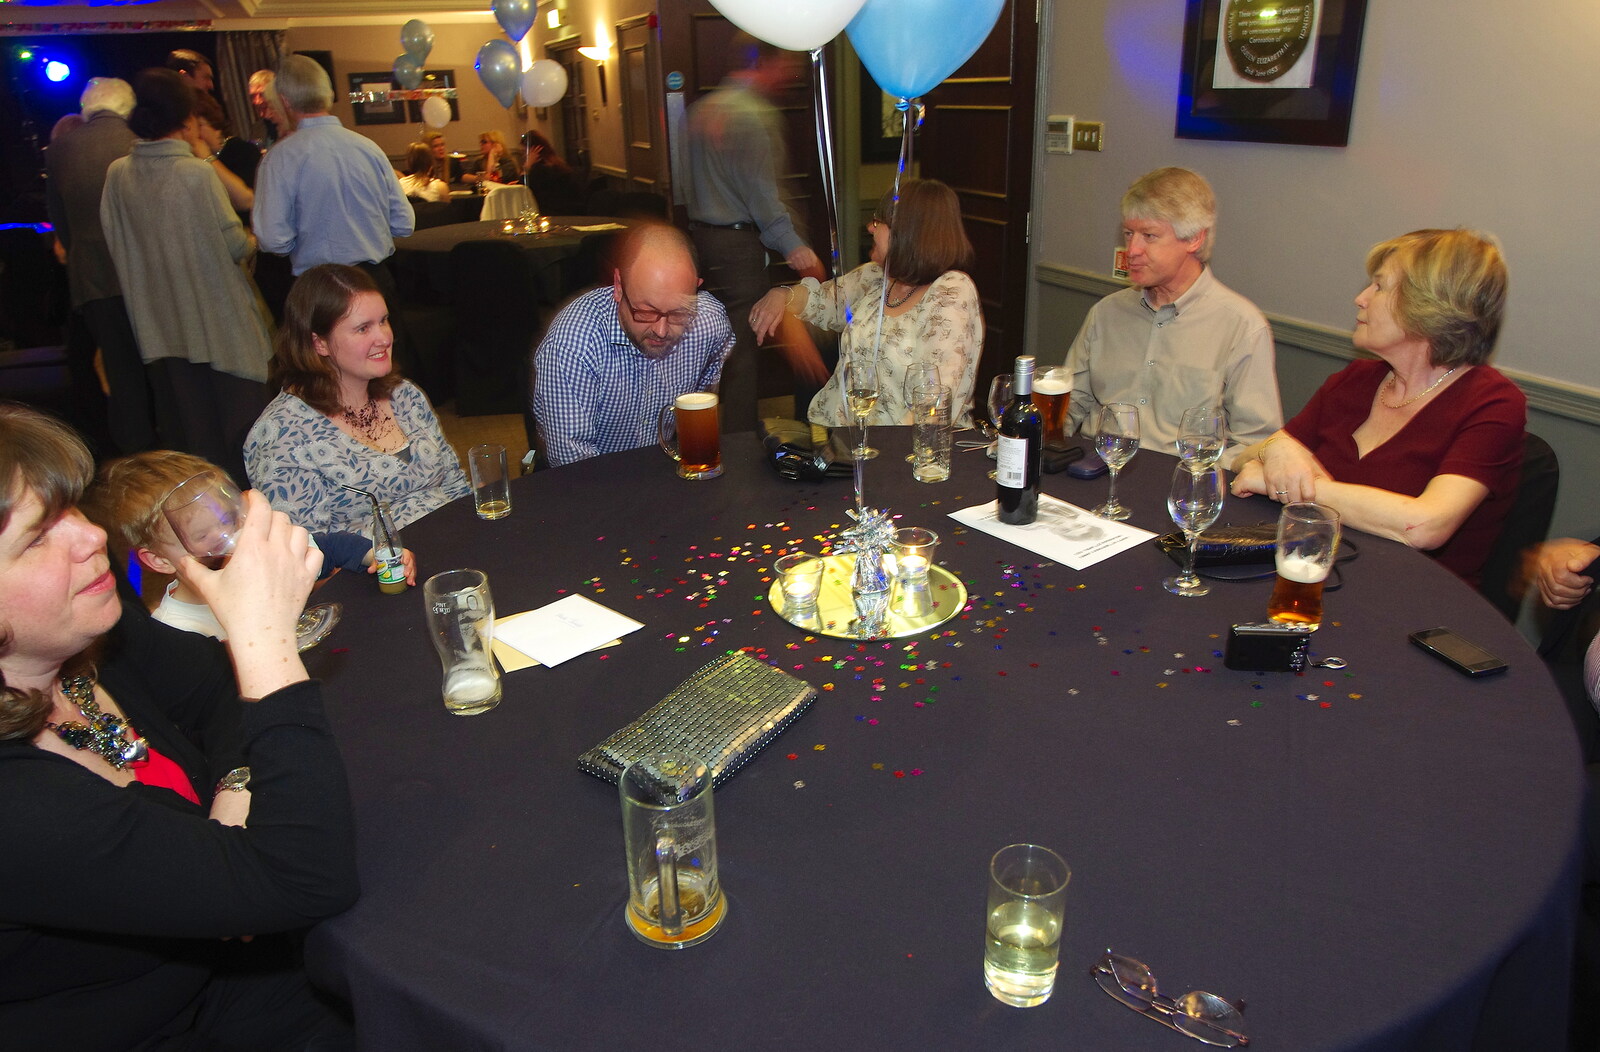 Our table from Uncle James's Ninetieth Birthday, Cheadle Hulme, Manchester - 20th April 2013